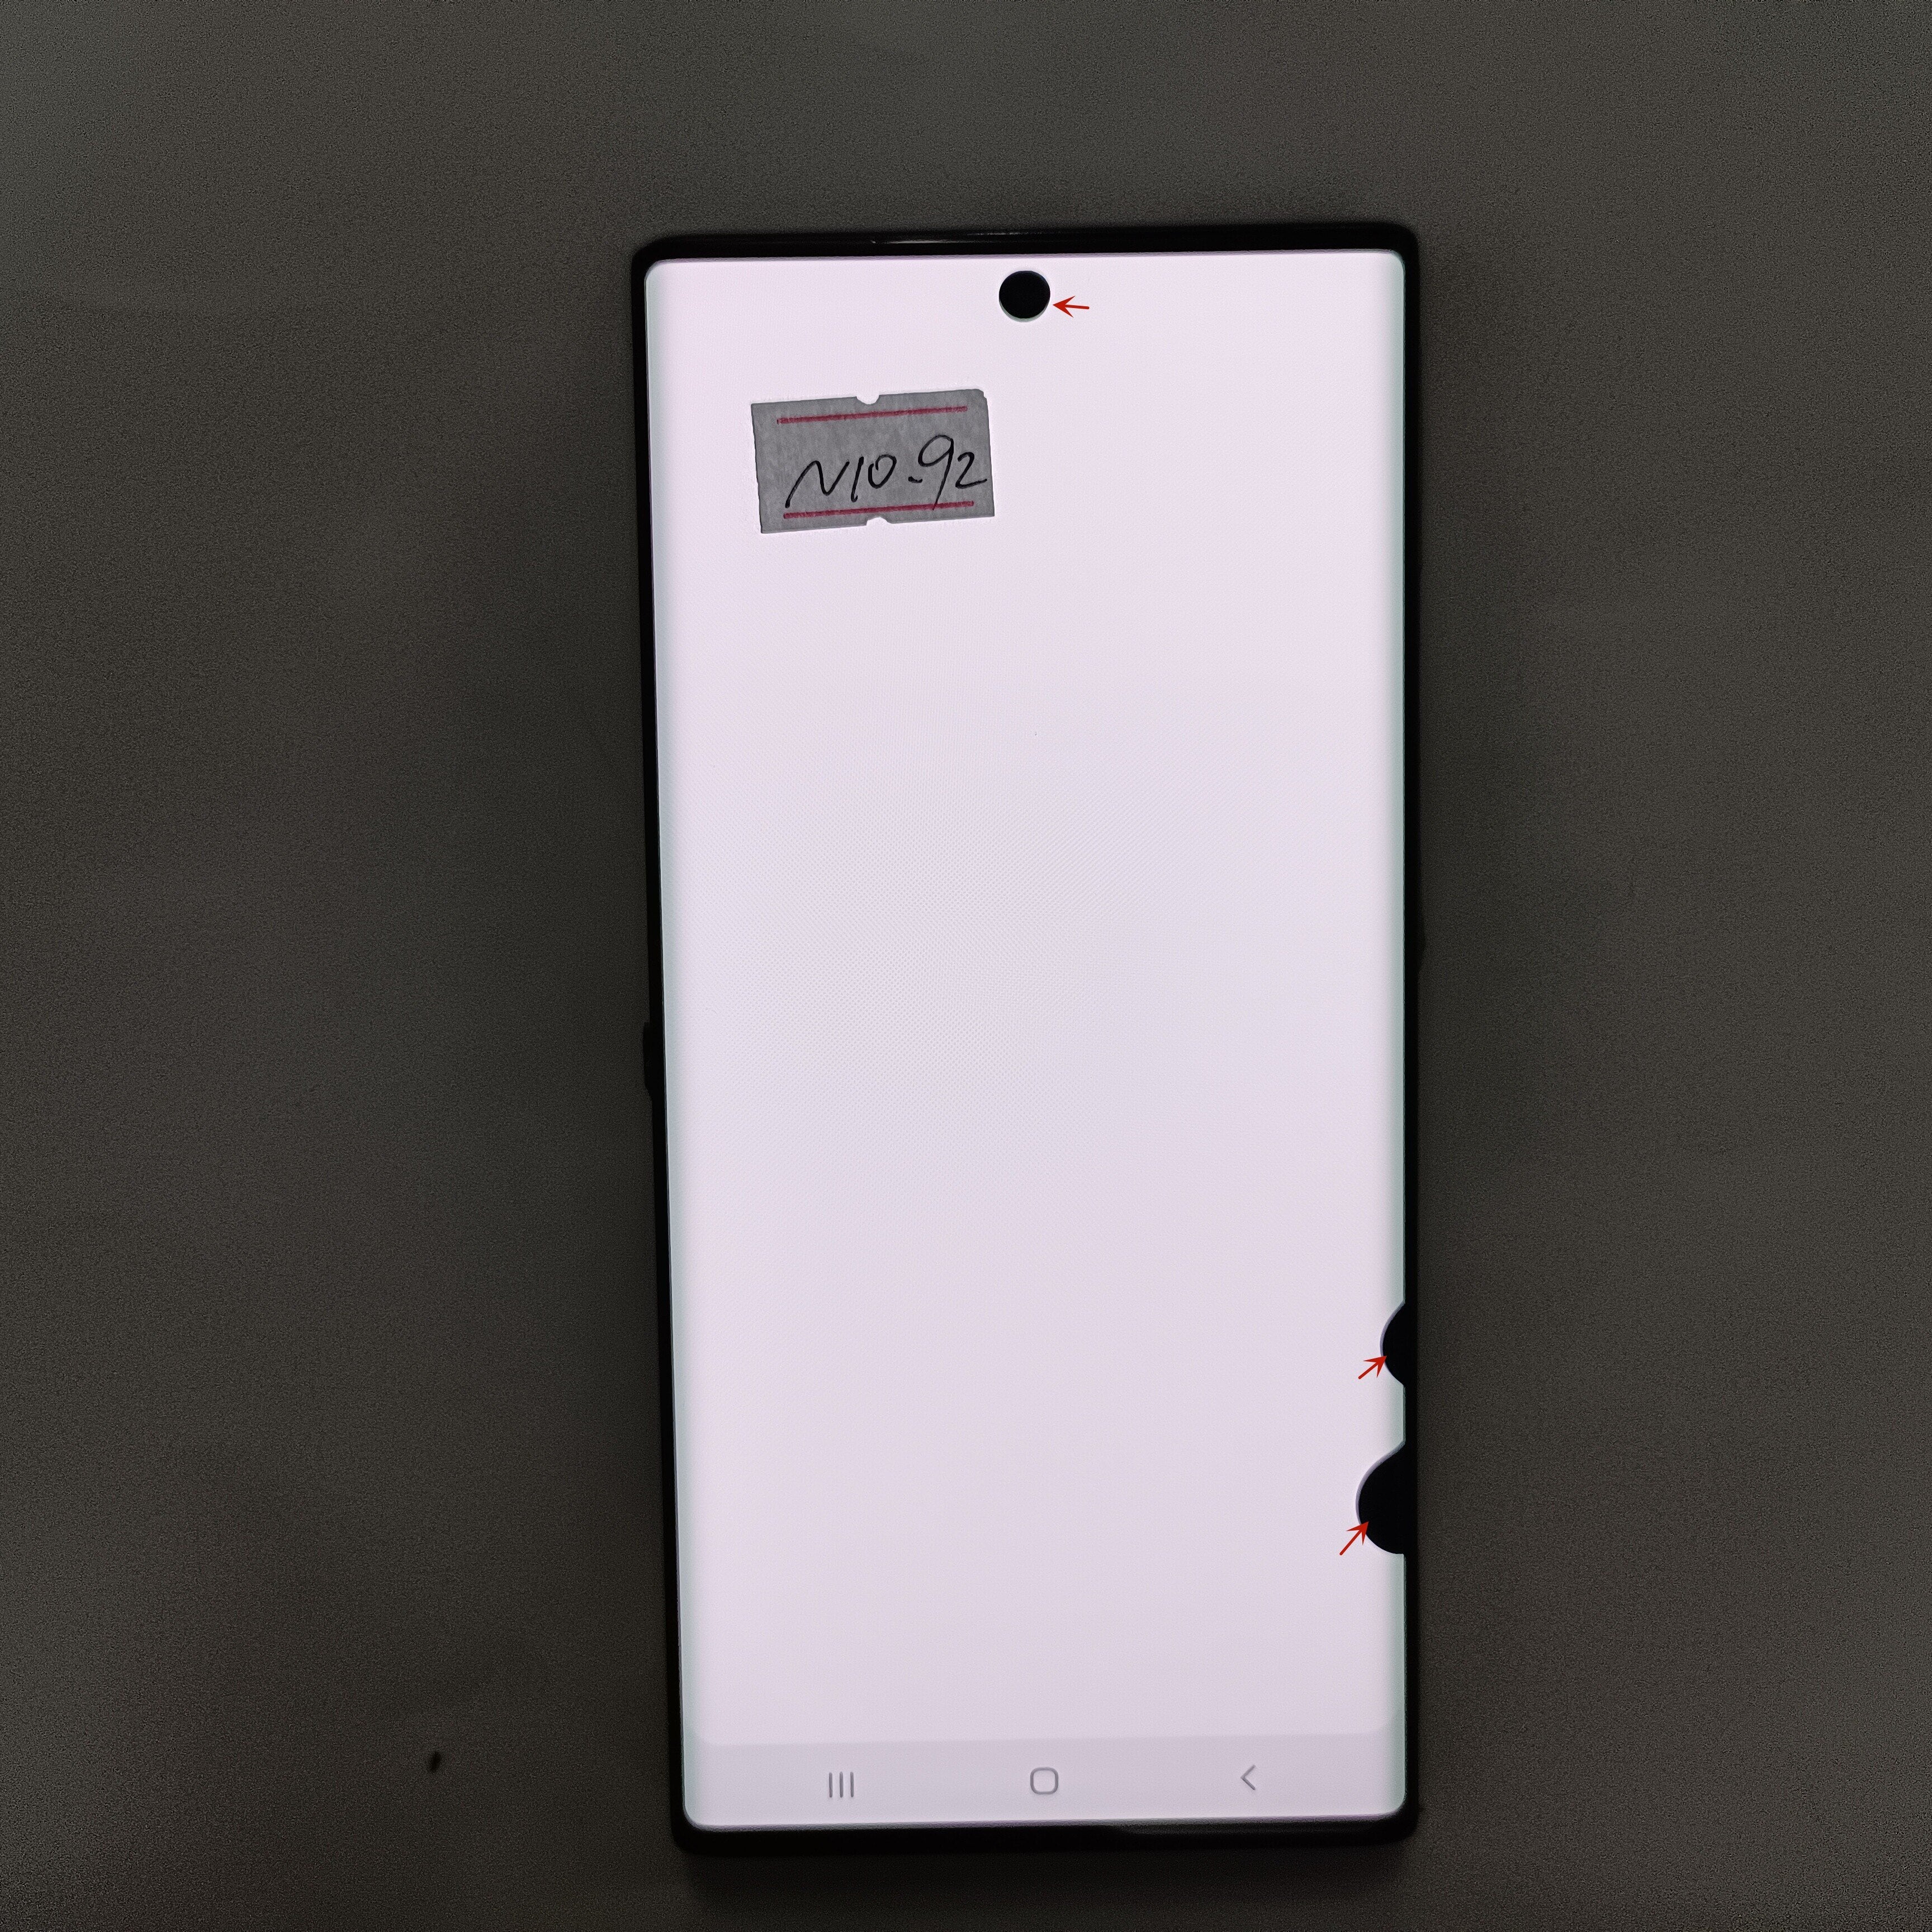 Original Screen For Samsung Galaxy Note 10  Display With Defects  Note10 SM-N970 N9700 N970F LCD Display Touch Screen